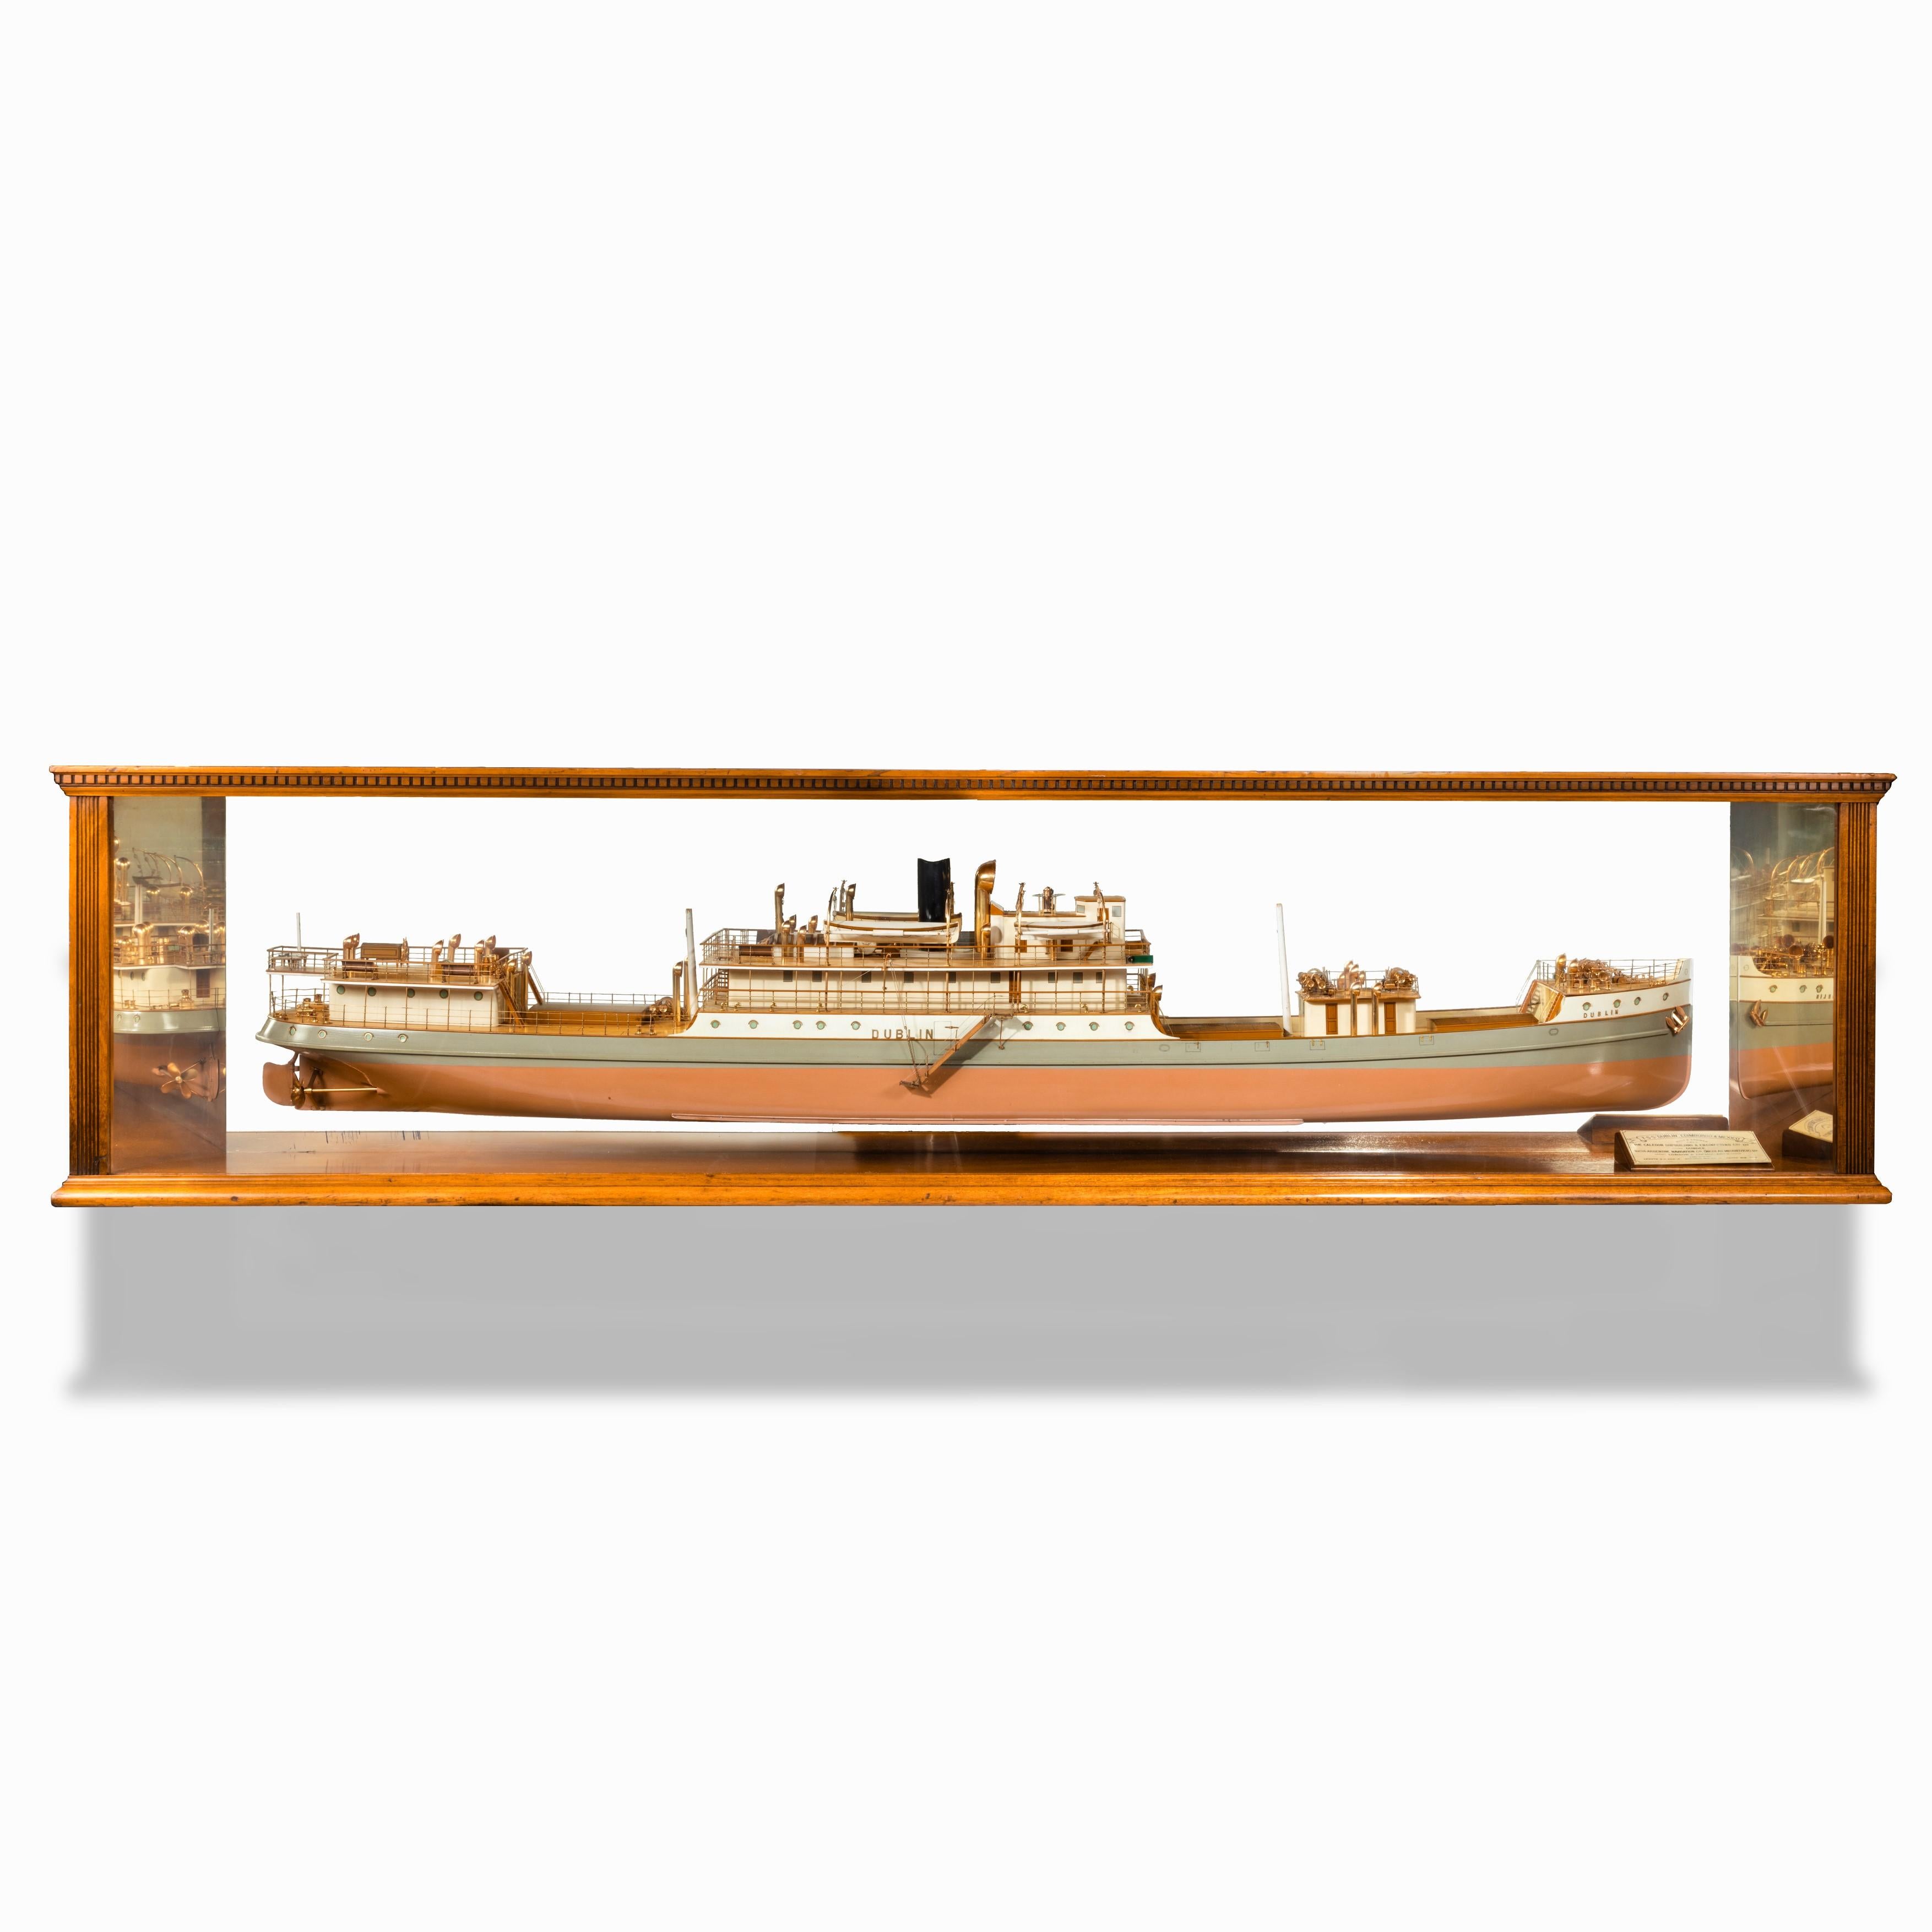 A cased ship’s boardroom model of three sister ships, recorded on the label as ‘TSS Dublin’, ‘Edimburgo’ and ‘Mexico’ built and engined by the Caledon Shipbuilding & Engineering Company Ltd, Dundee, for the Argentine Navigation Co. (Nicolas